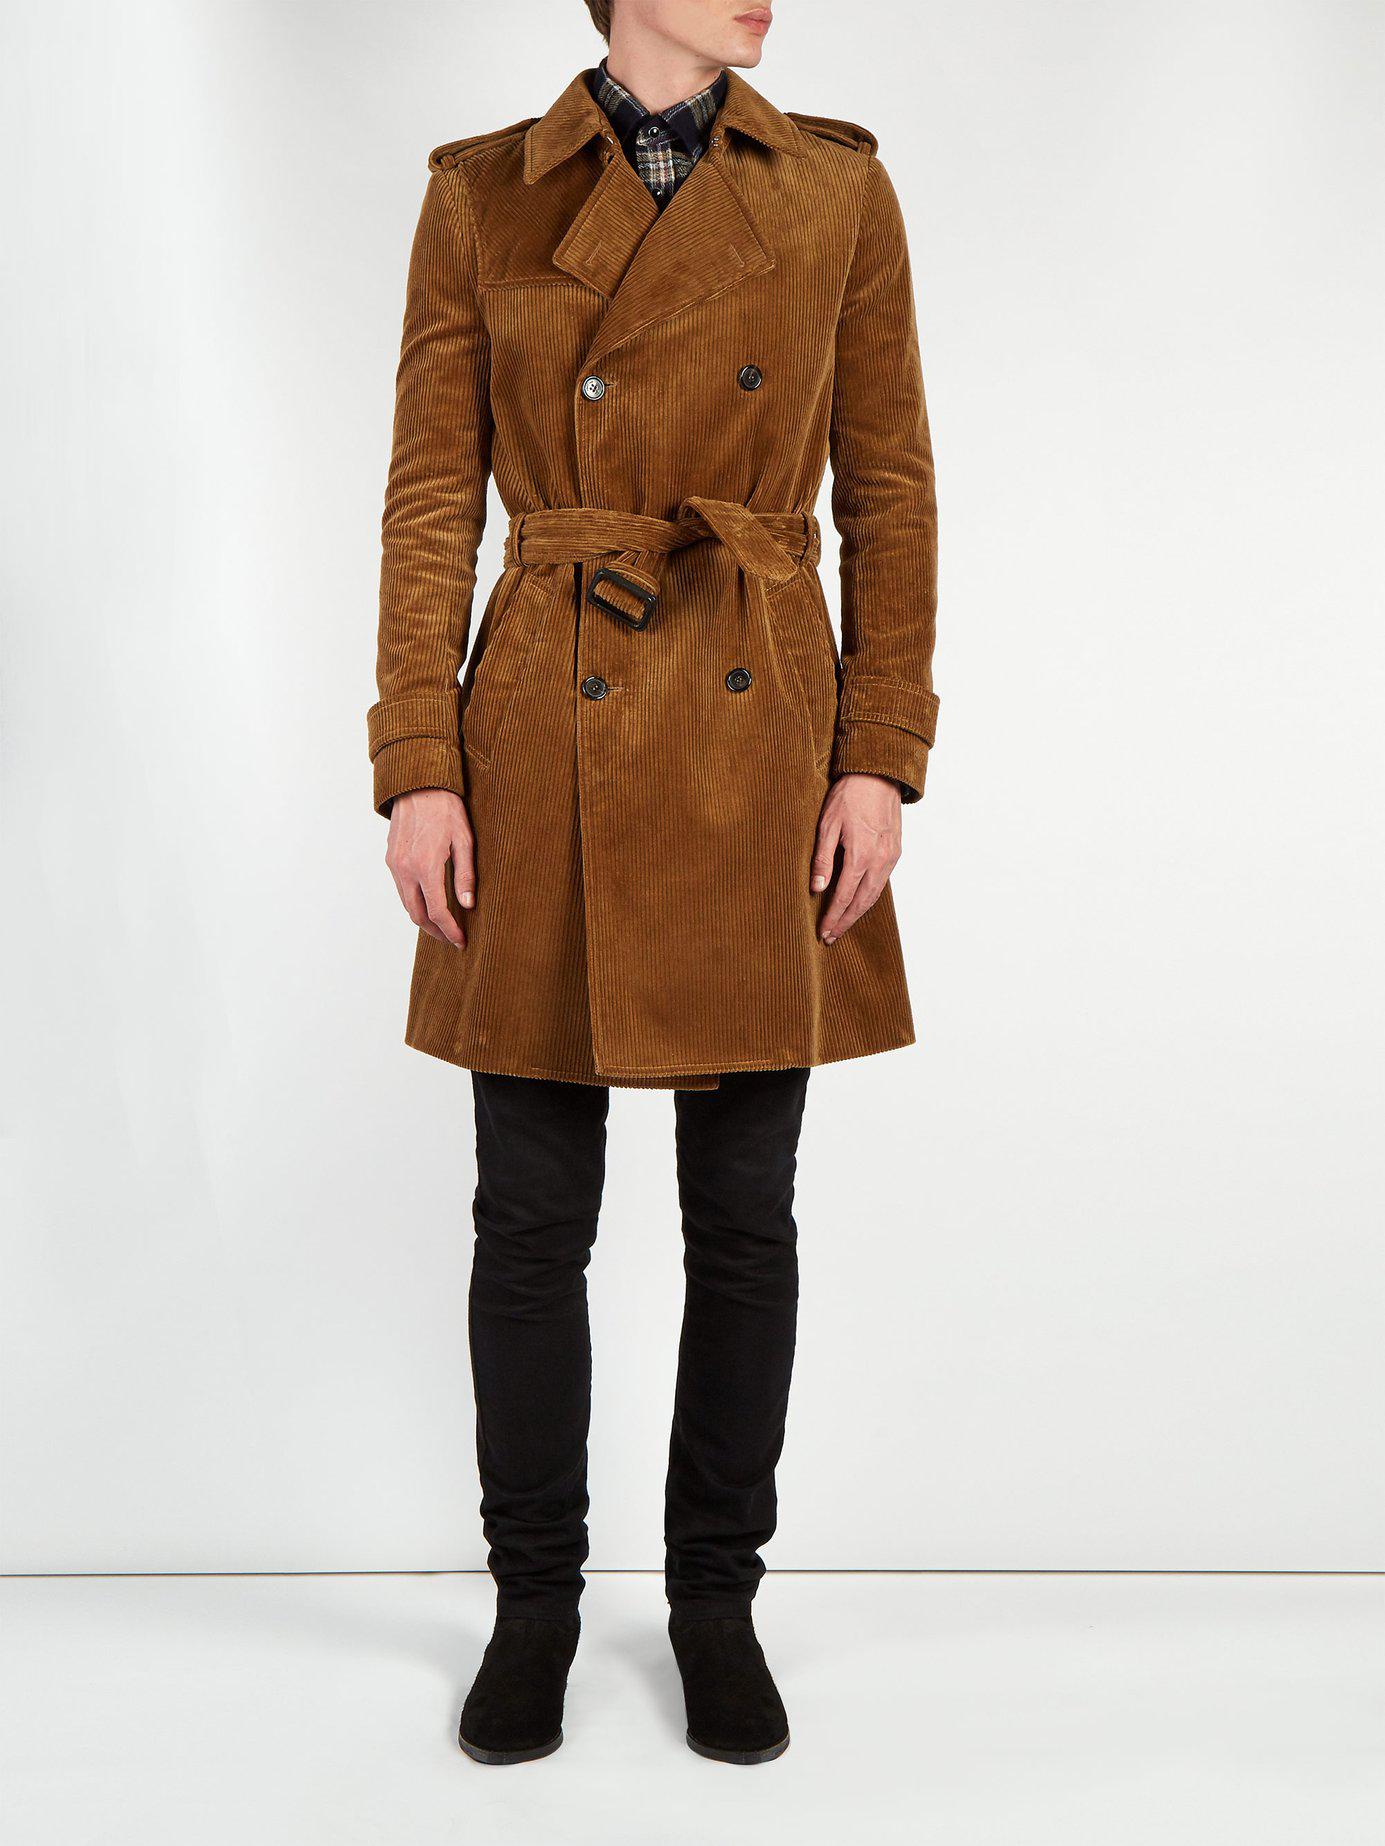 Saint Laurent Double Breasted Corduroy Trench Coat in Brown for Men - Lyst